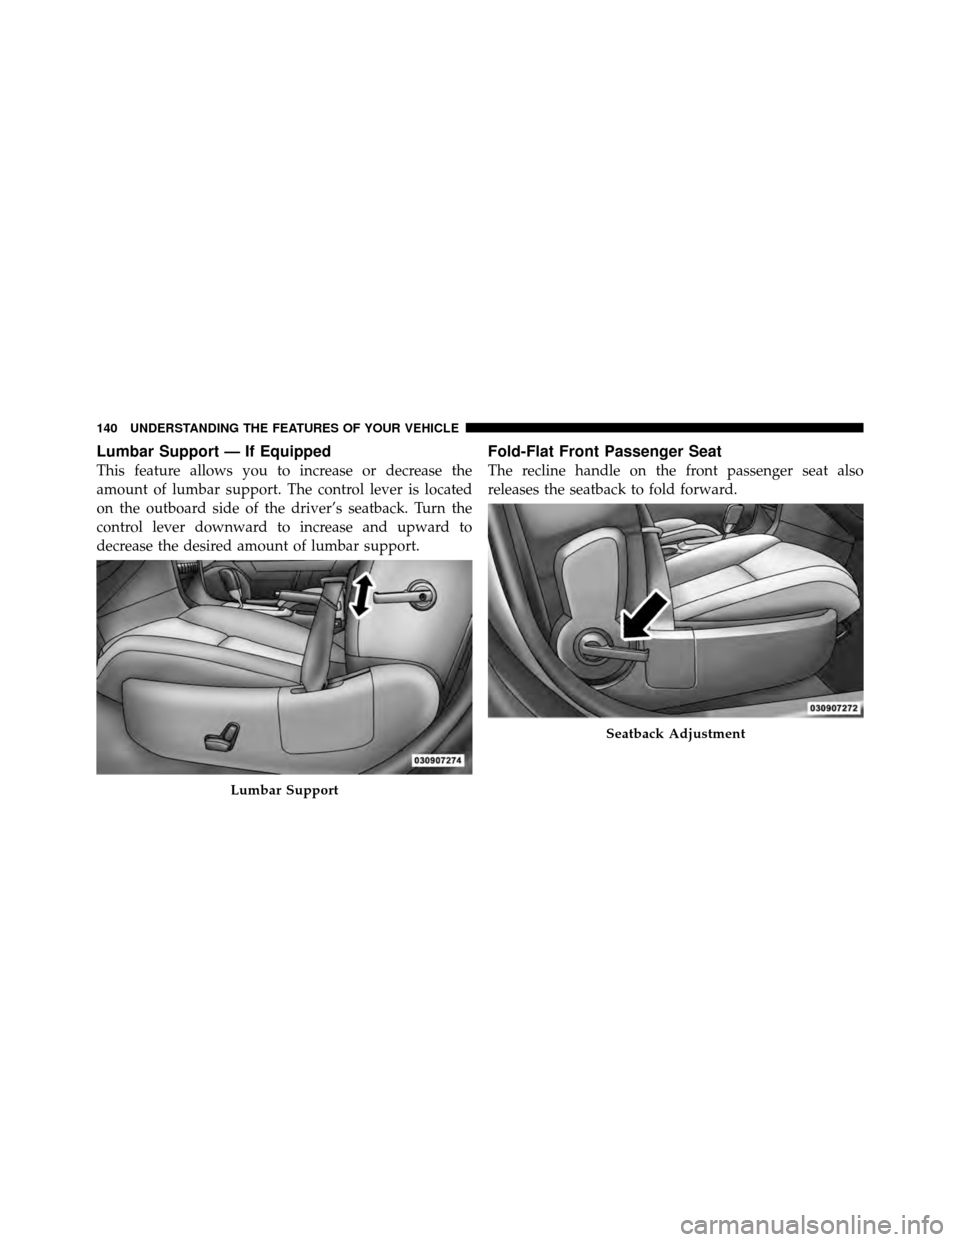 DODGE AVENGER 2011 2.G Owners Manual Lumbar Support — If Equipped
This feature allows you to increase or decrease the
amount of lumbar support. The control lever is located
on the outboard side of the driver’s seatback. Turn the
cont